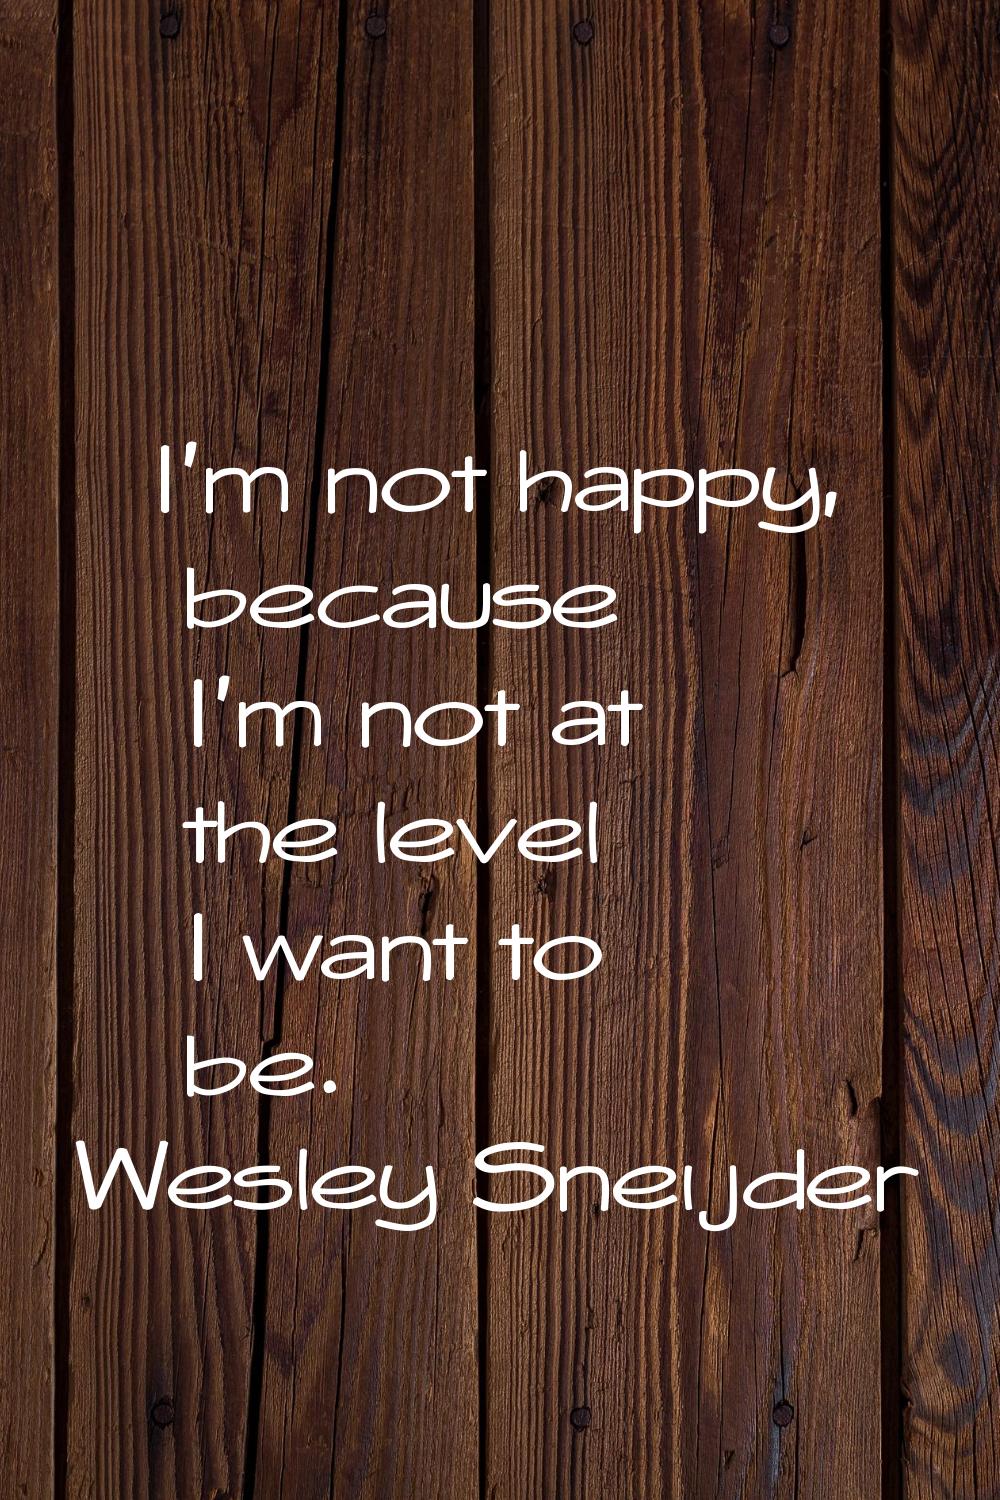 I'm not happy, because I'm not at the level I want to be.